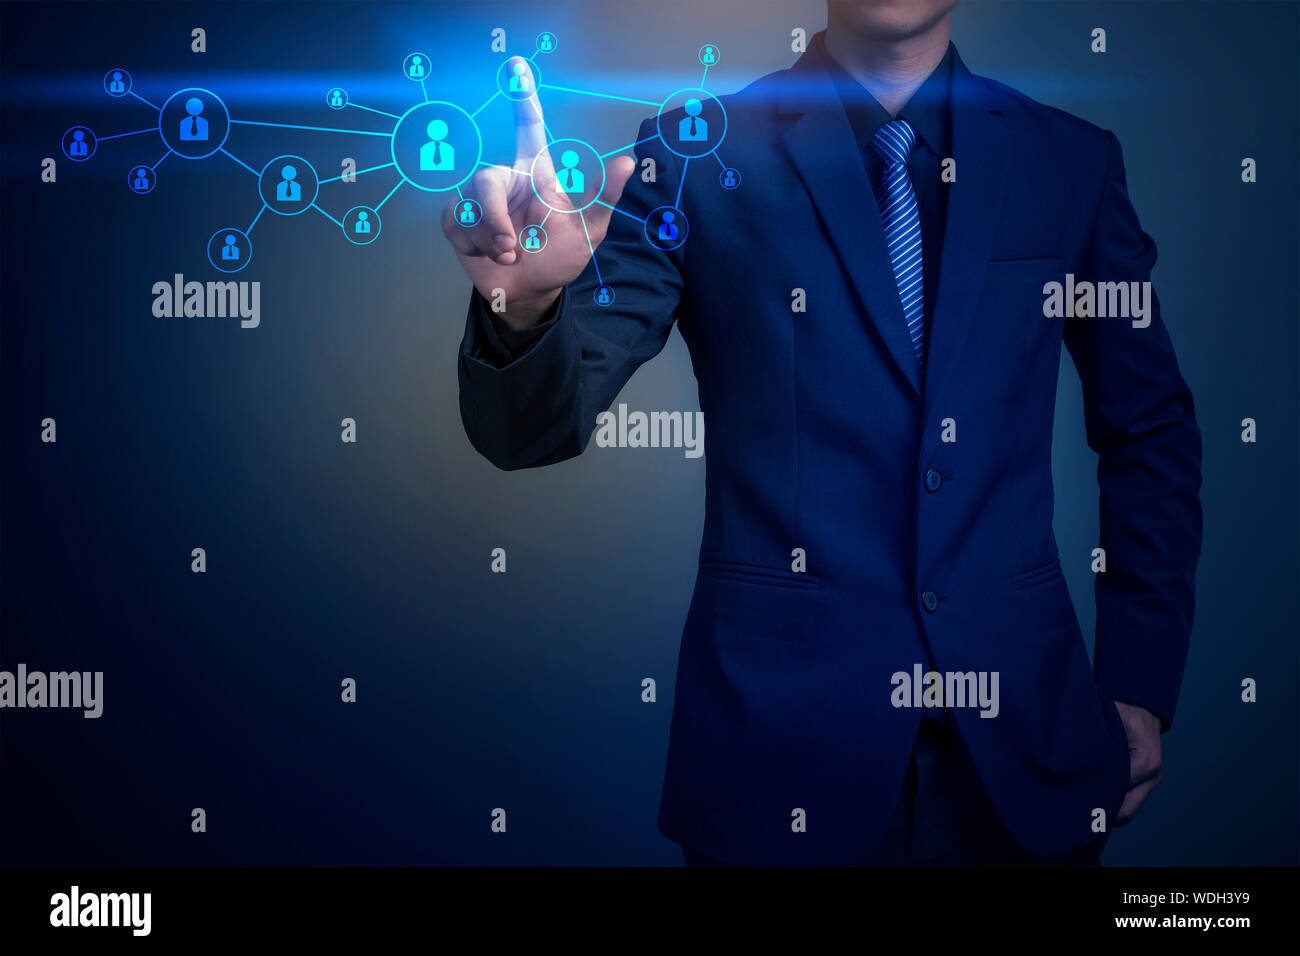 Digital Composite Image Of Businessman Against Colored Background Stock Photo